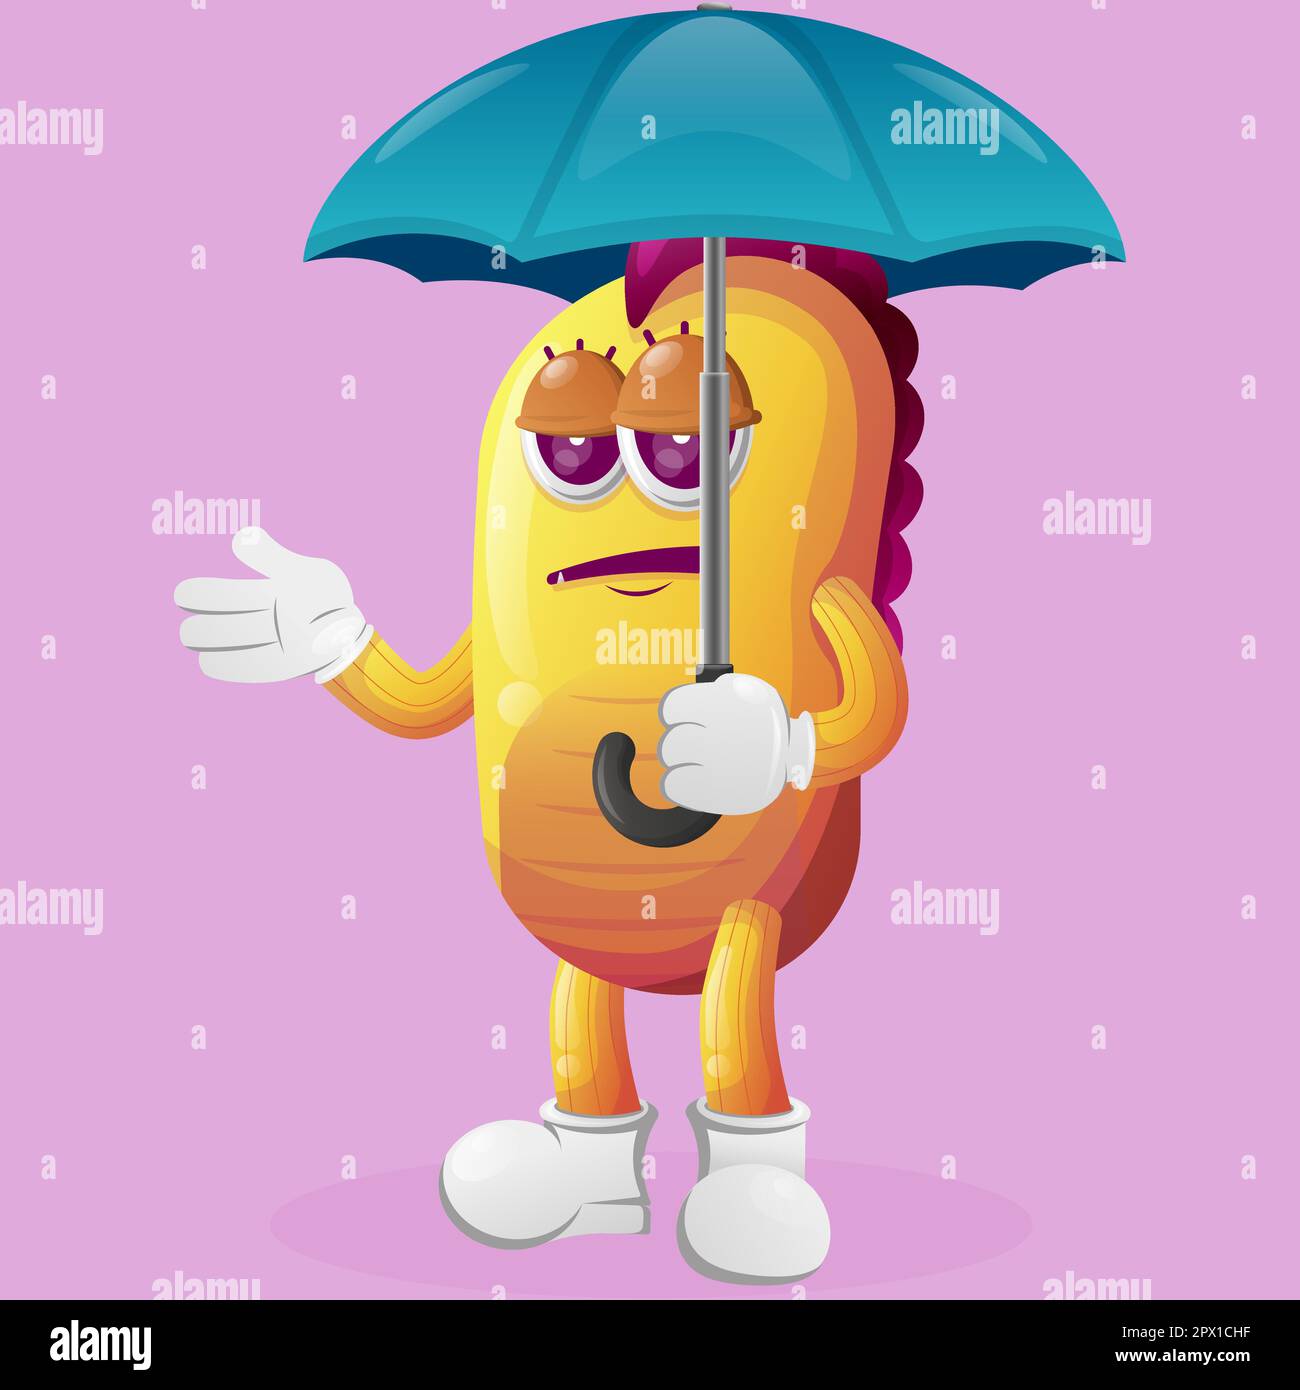 Cute yellow monster holding umbrella with boblue expression. Perfect for kids, small business or e-Commerce, merchandise and sticker, banner promotion Stock Vector